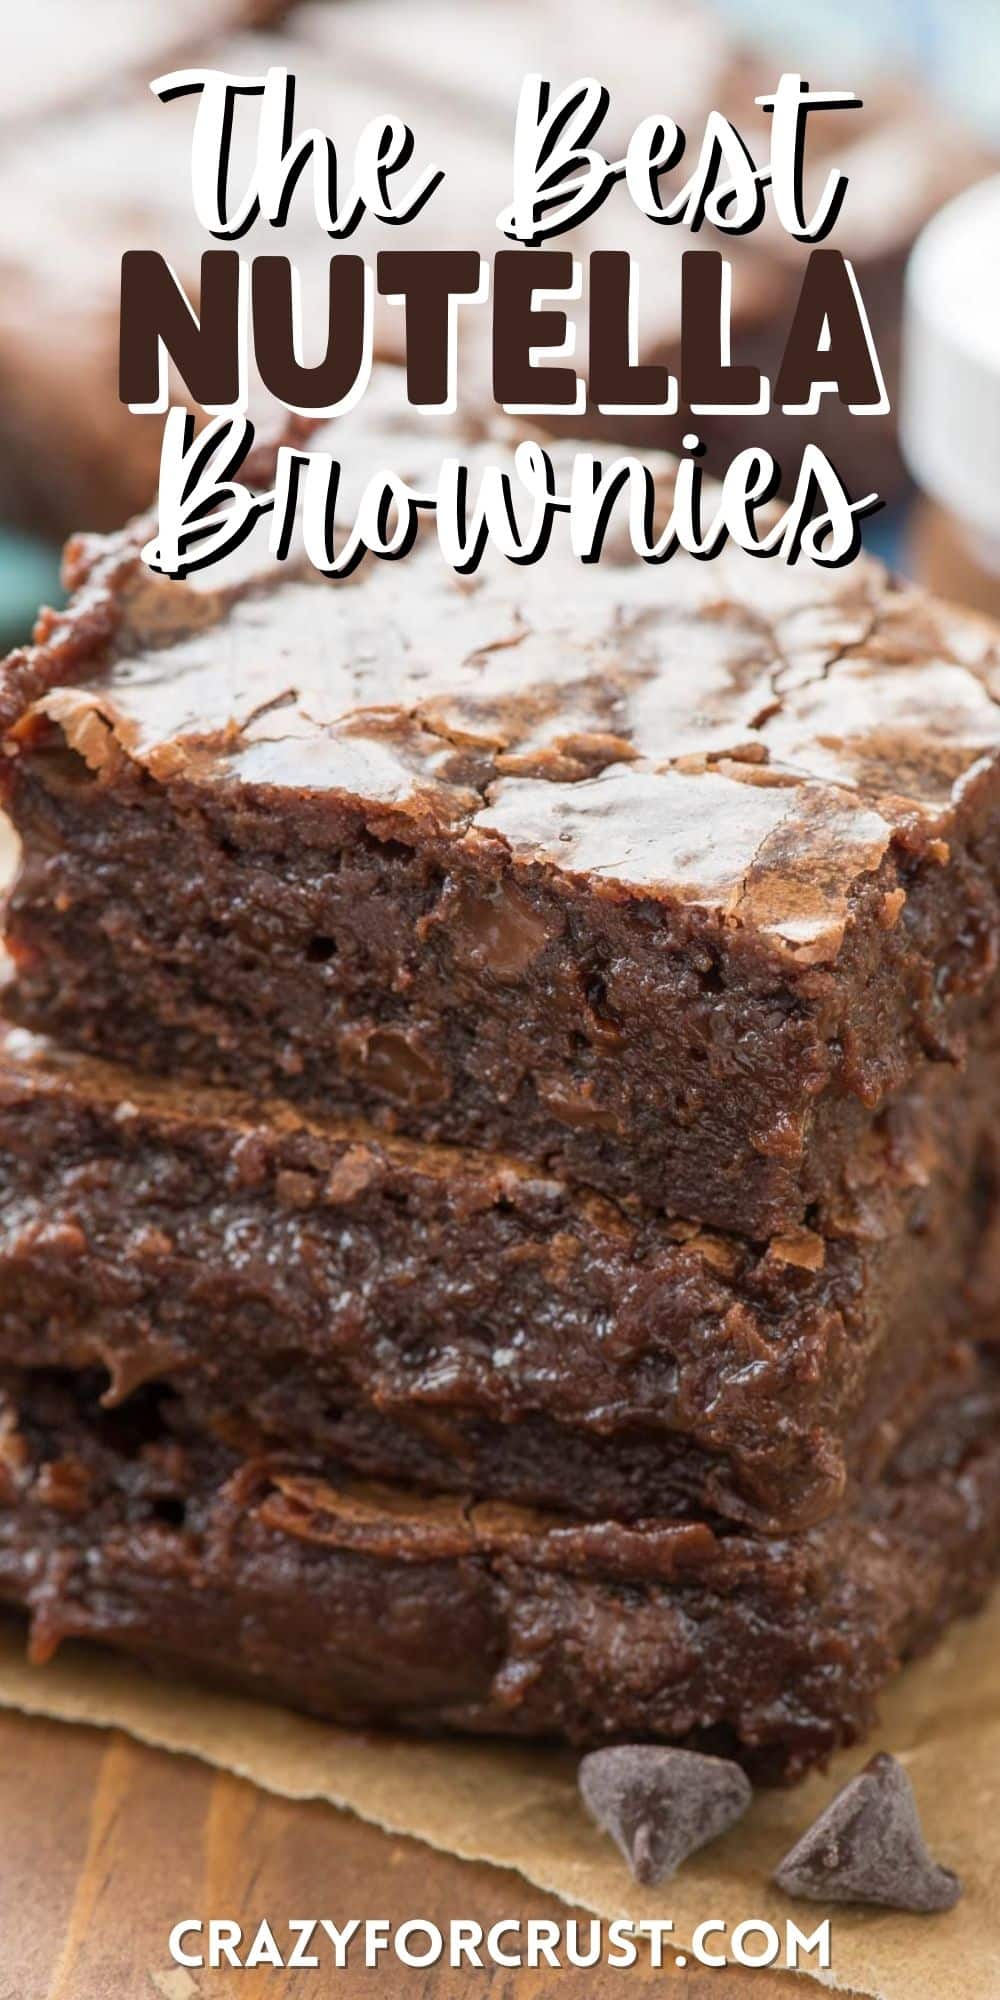 stacked brownies and a wood table with words on the image